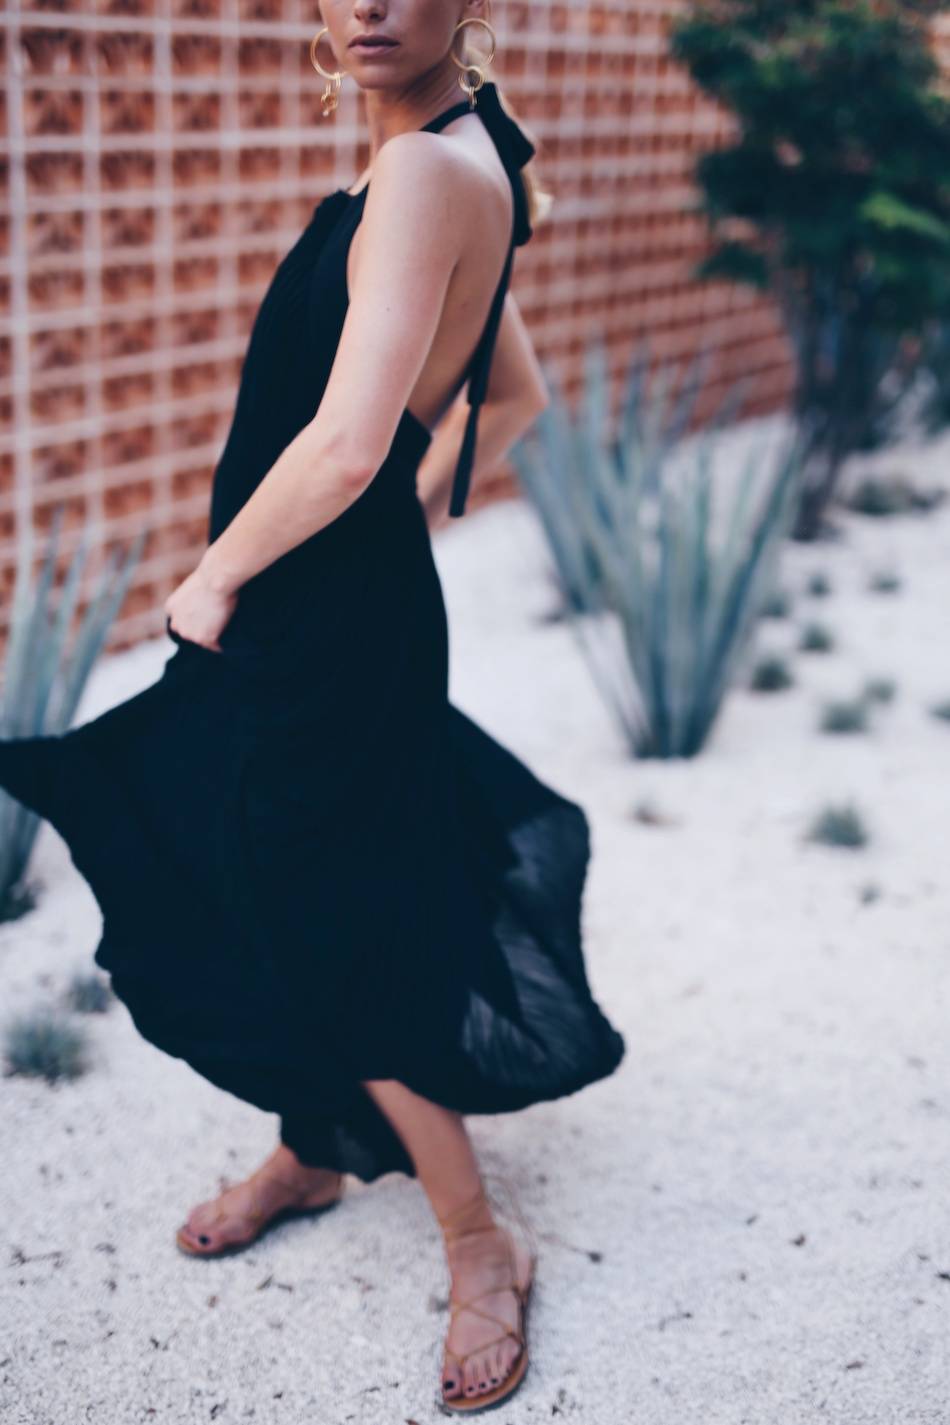 Style and beauty blogger Jill Lansky of The August Diaries on what to wear to dinner on vacation in Aritzia black maxi dress, gladiator sandals, statement earrings